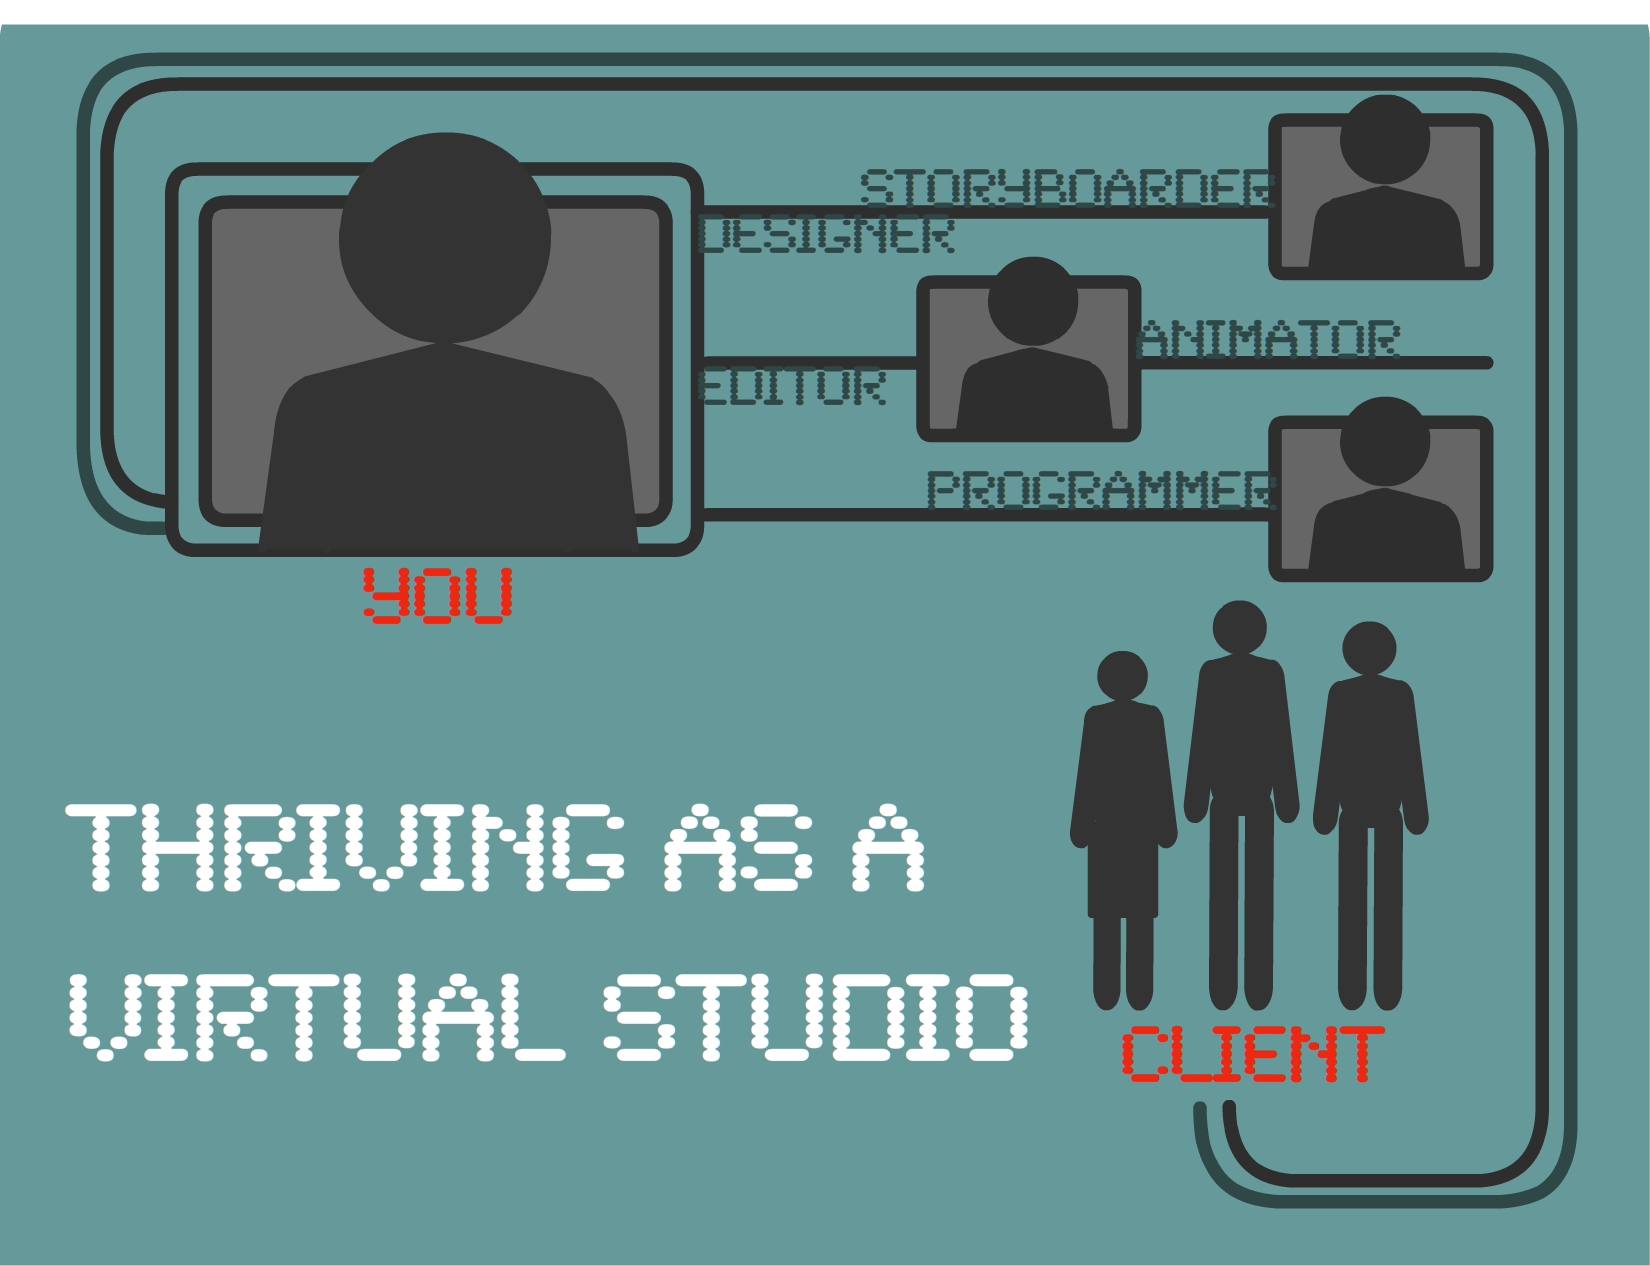 ASIFA-East presents: Thriving as a Virtual Studio